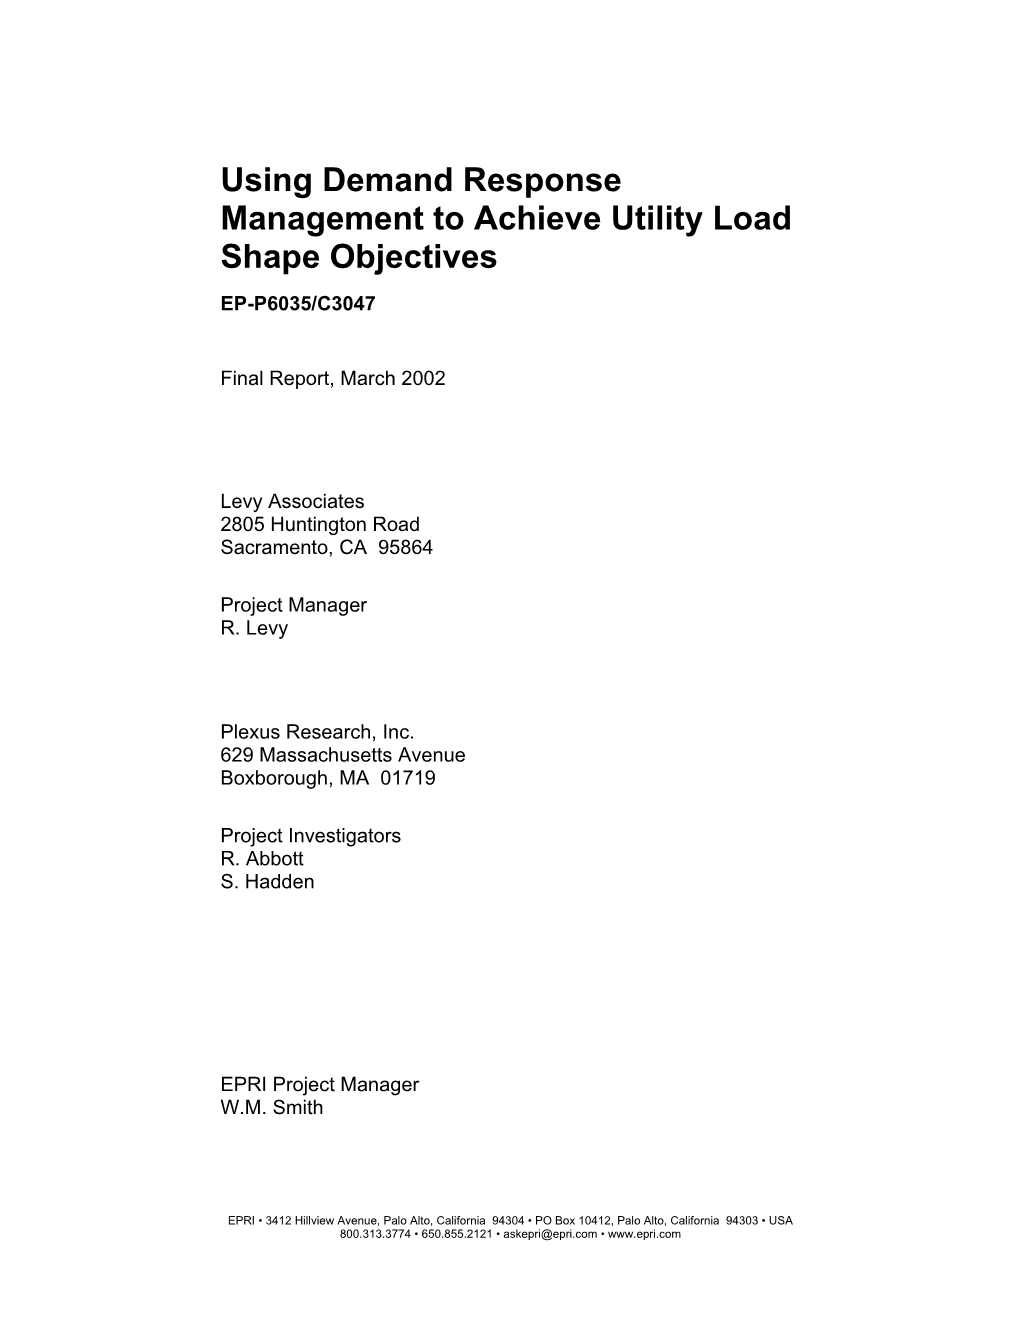 Using Demand Response Management to Achieve Utility Load Shape Objectives